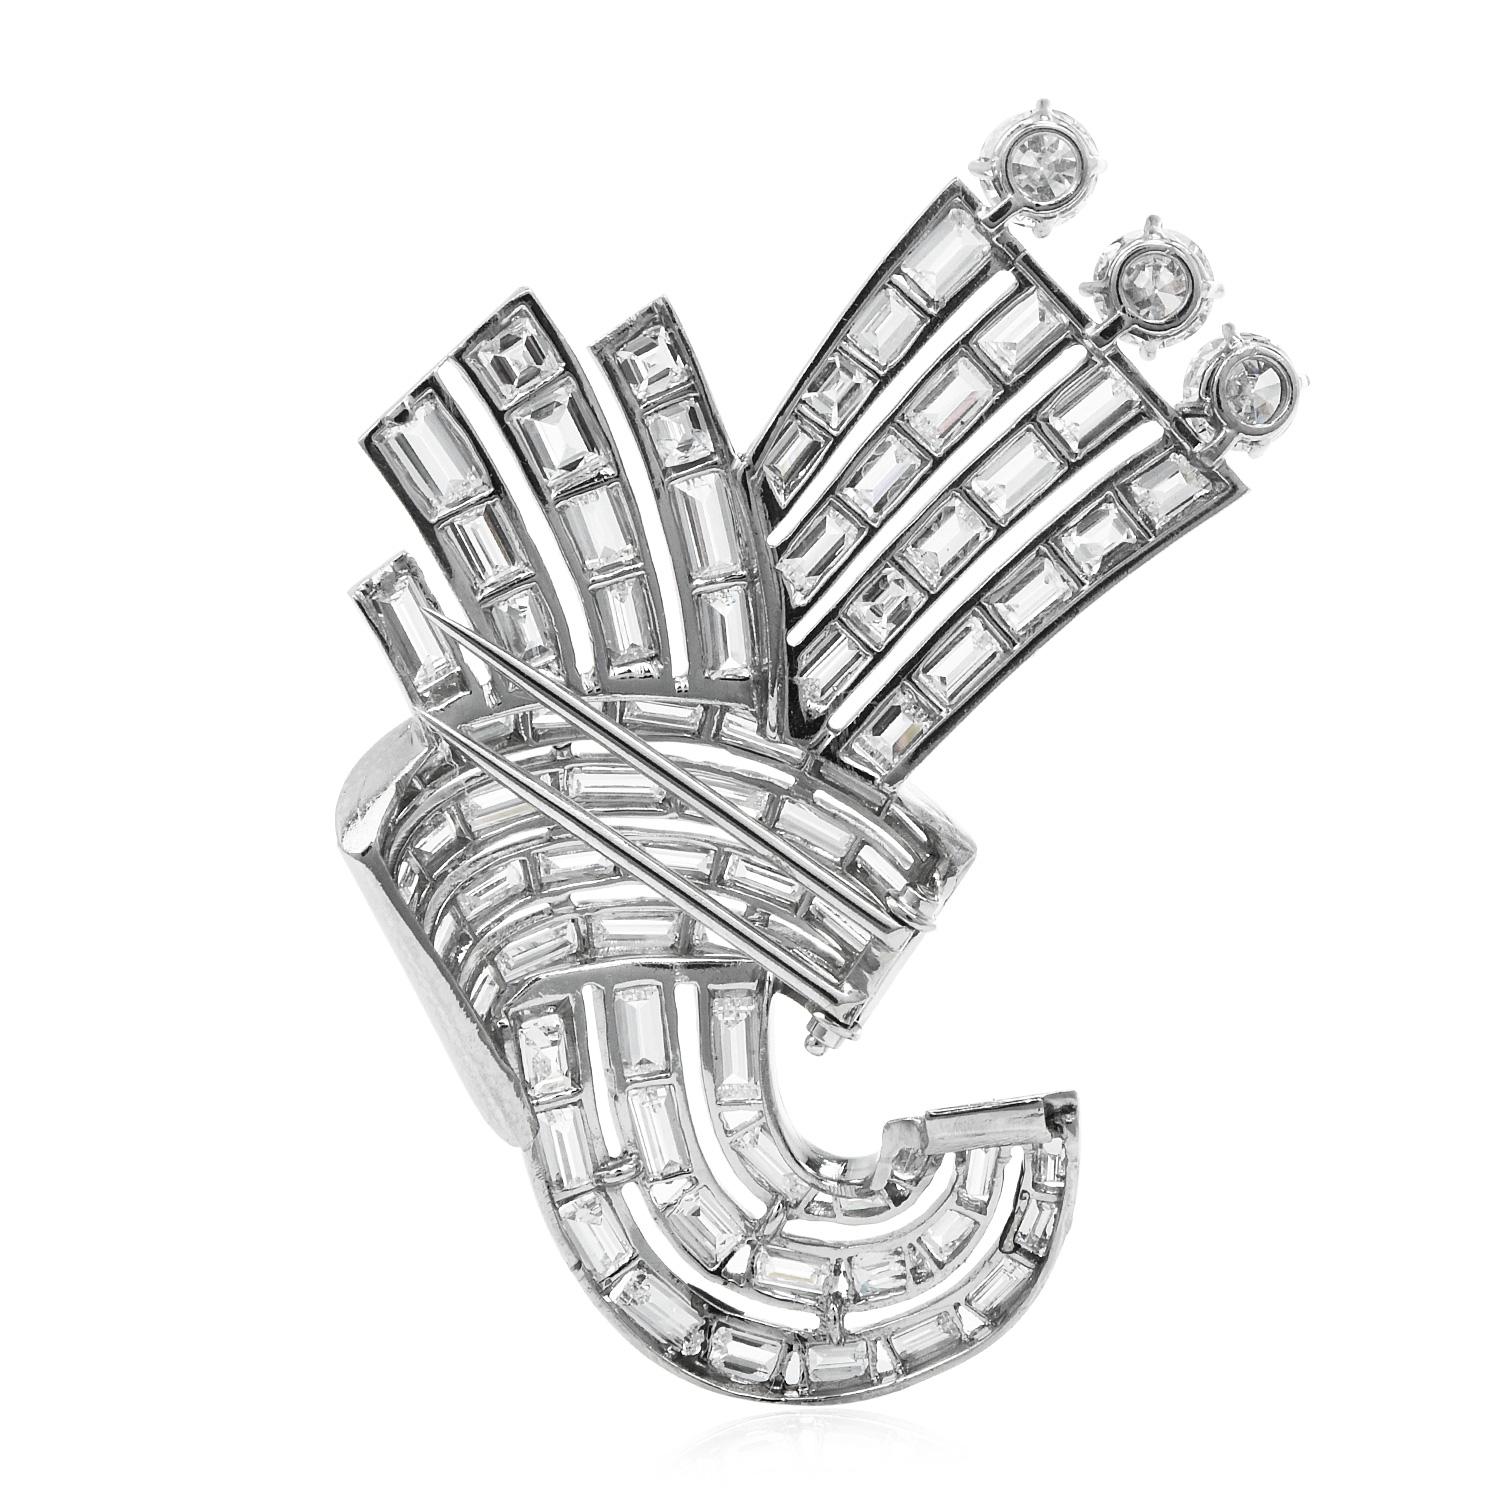 A burst of sparkle and elegance make this brooch unique and the perfect compliment for any tennis bracelet!

This Vintage Pin is Designed of PlatinumAND featuring Three top Round brilliant-cut and Baguette-cut Diamonds.

The 3 Genuine High-quality